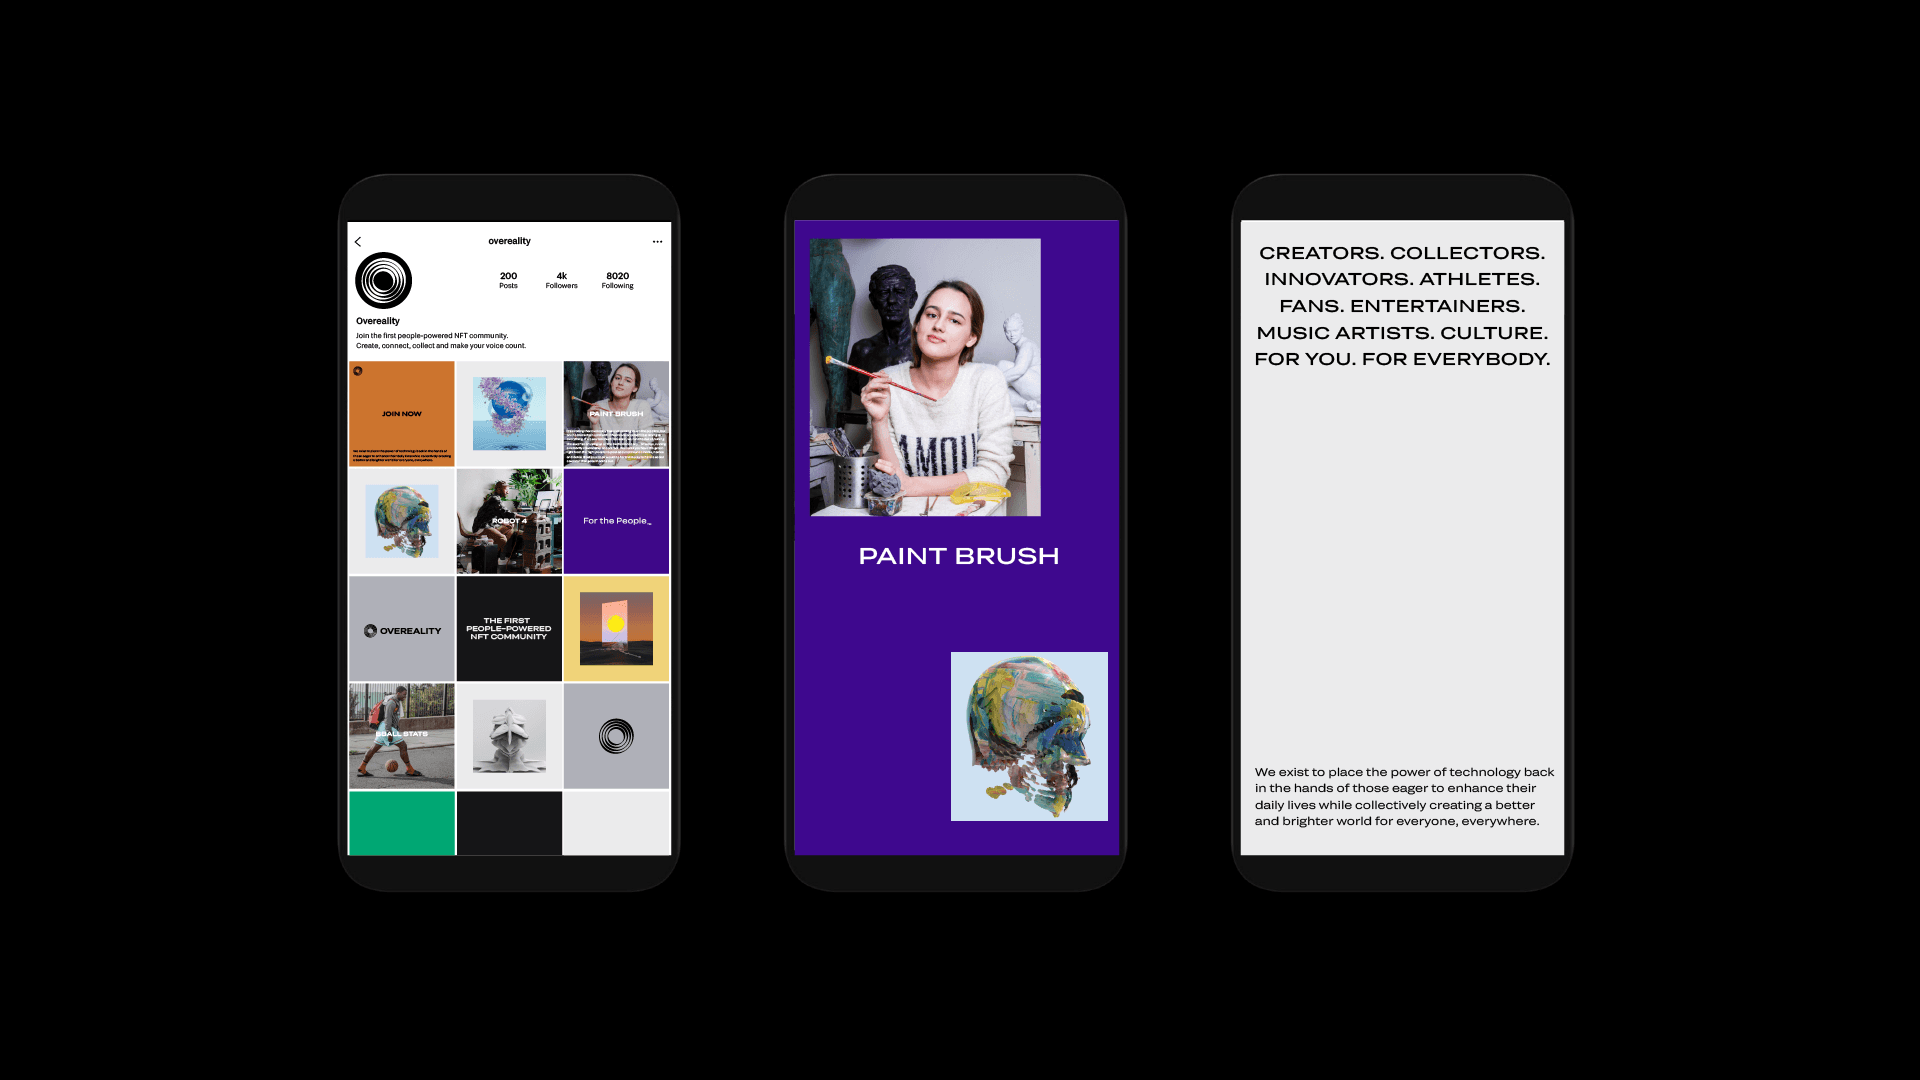 3 phone screens showing concepts for social media presence. Instagram grid and 2 posts. One post is of artist and her nft with the word PAINT BRUSH. 3rd screen is All text reading Creators. Collectors. Innovators. Athletes. Fans. Entertainers. Music Artists. Culture. For You. For Everybody.